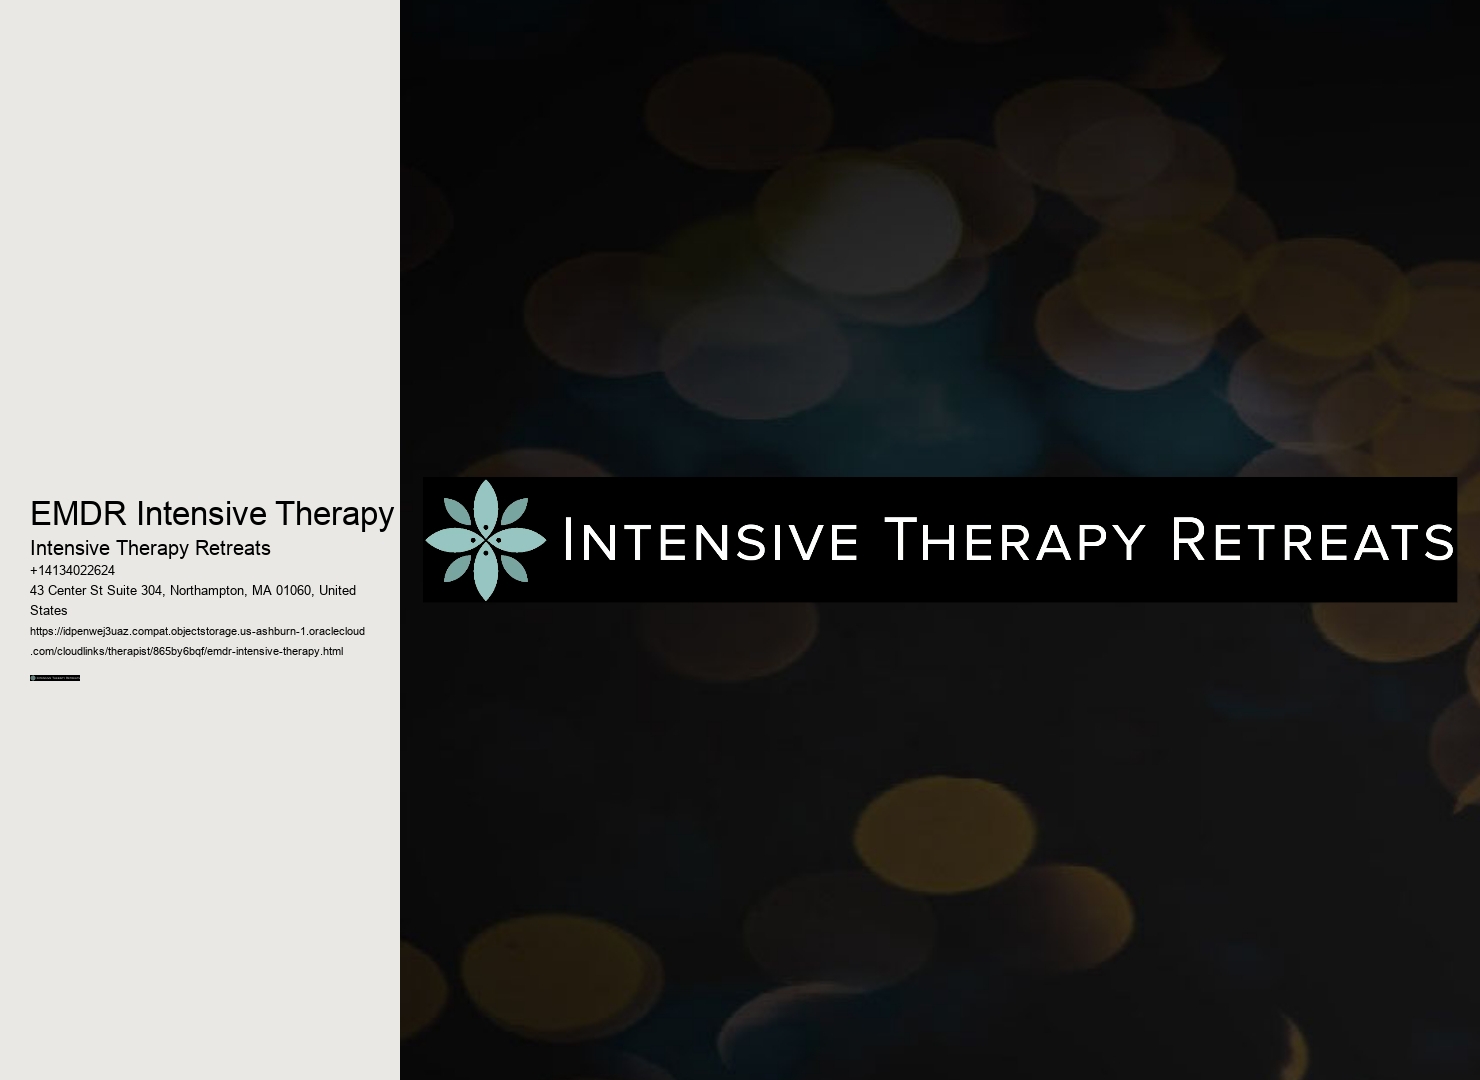 EMDR Intensive Therapy